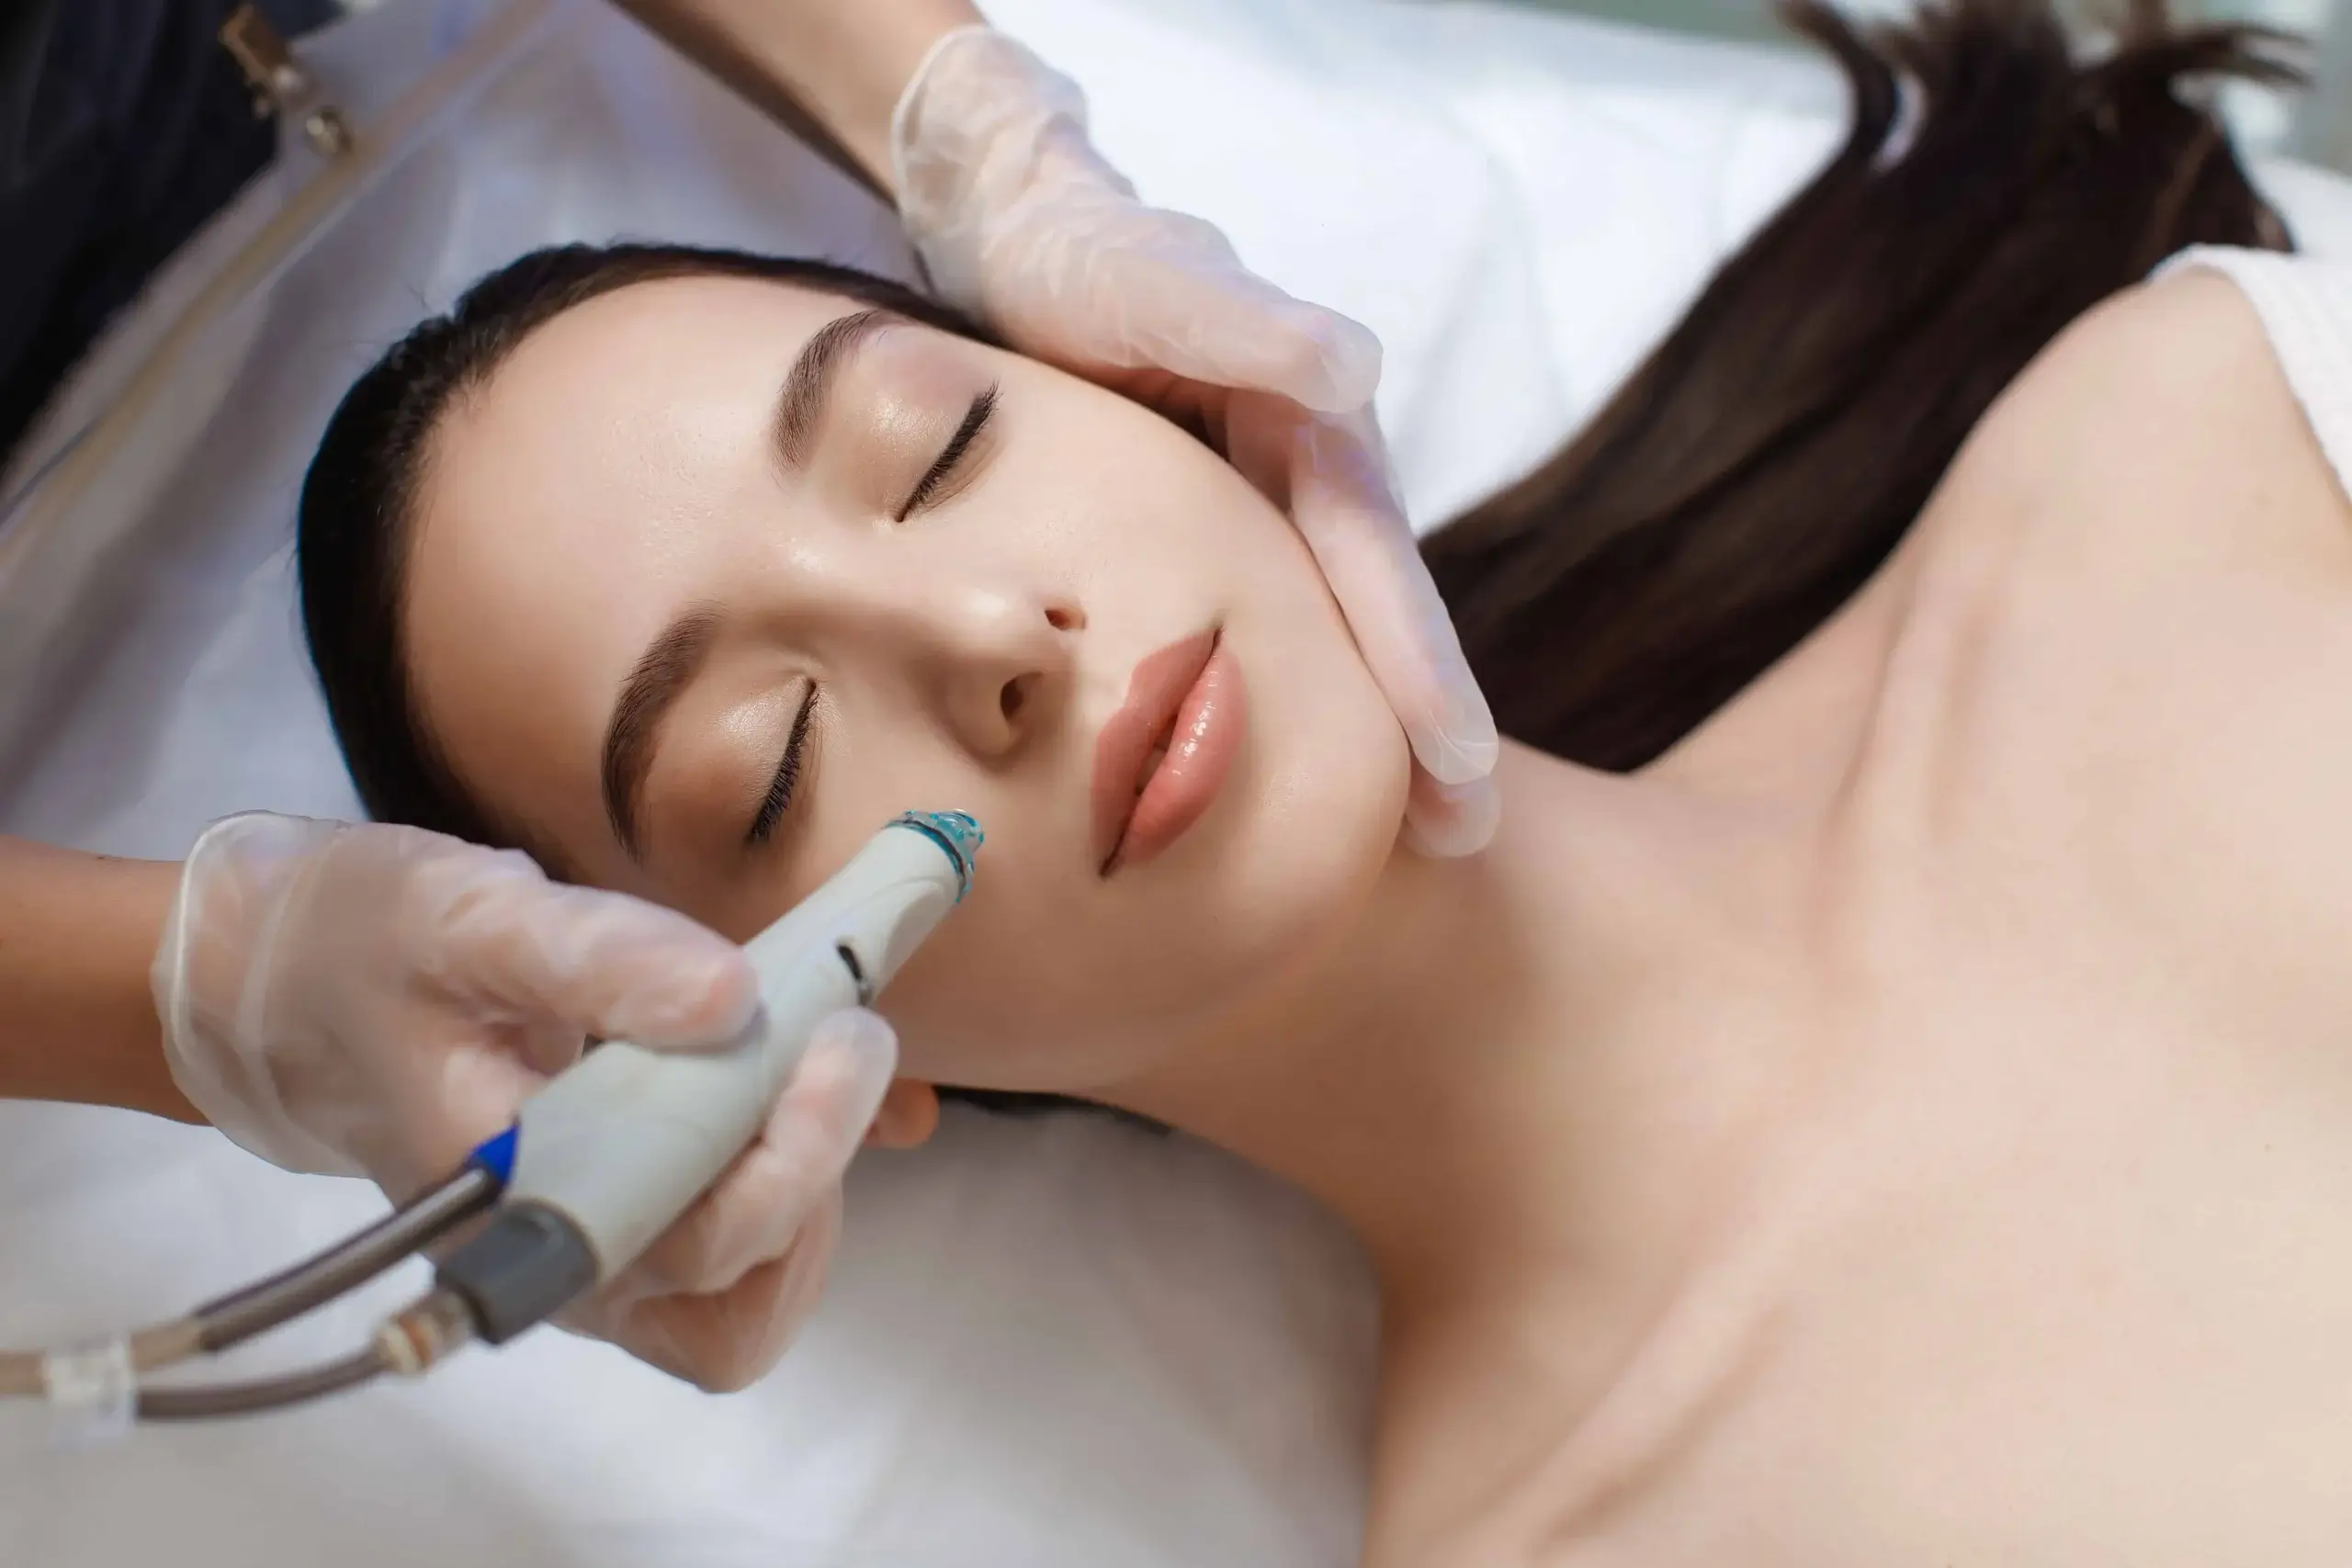 Eve Hydrofacial Microdermabrasion in Leominister MA scaled